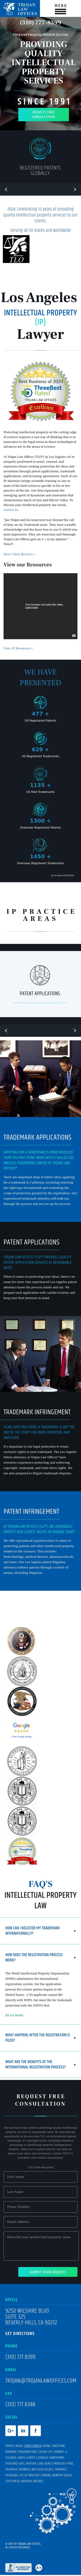 Trojan Law Offices - Beverly Hills CA Lawyers